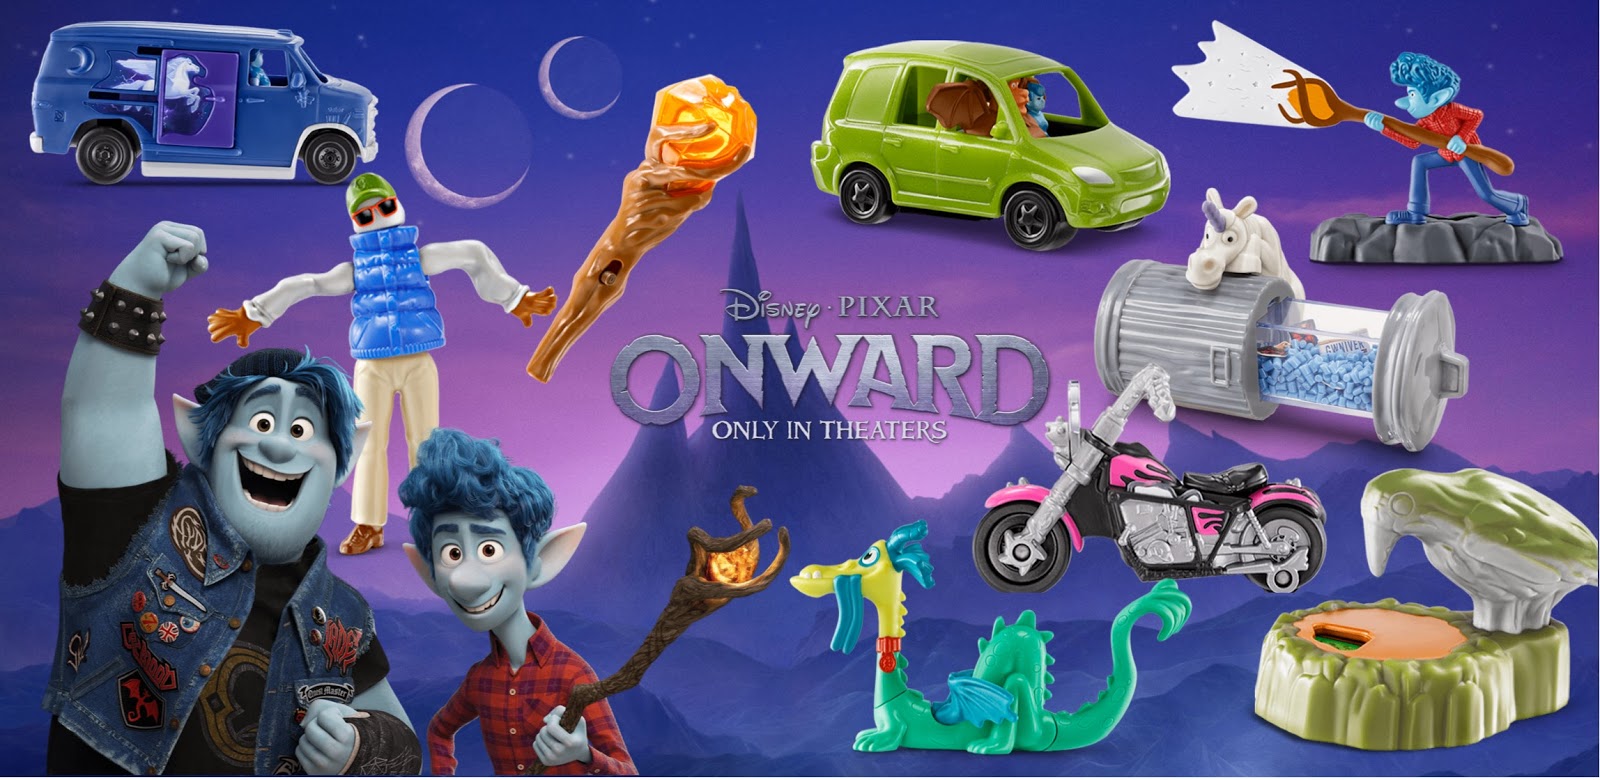 Take A Detailed Look At The New Onward Happy Meal Toys Now Available At Mcdonald S Pixar Post